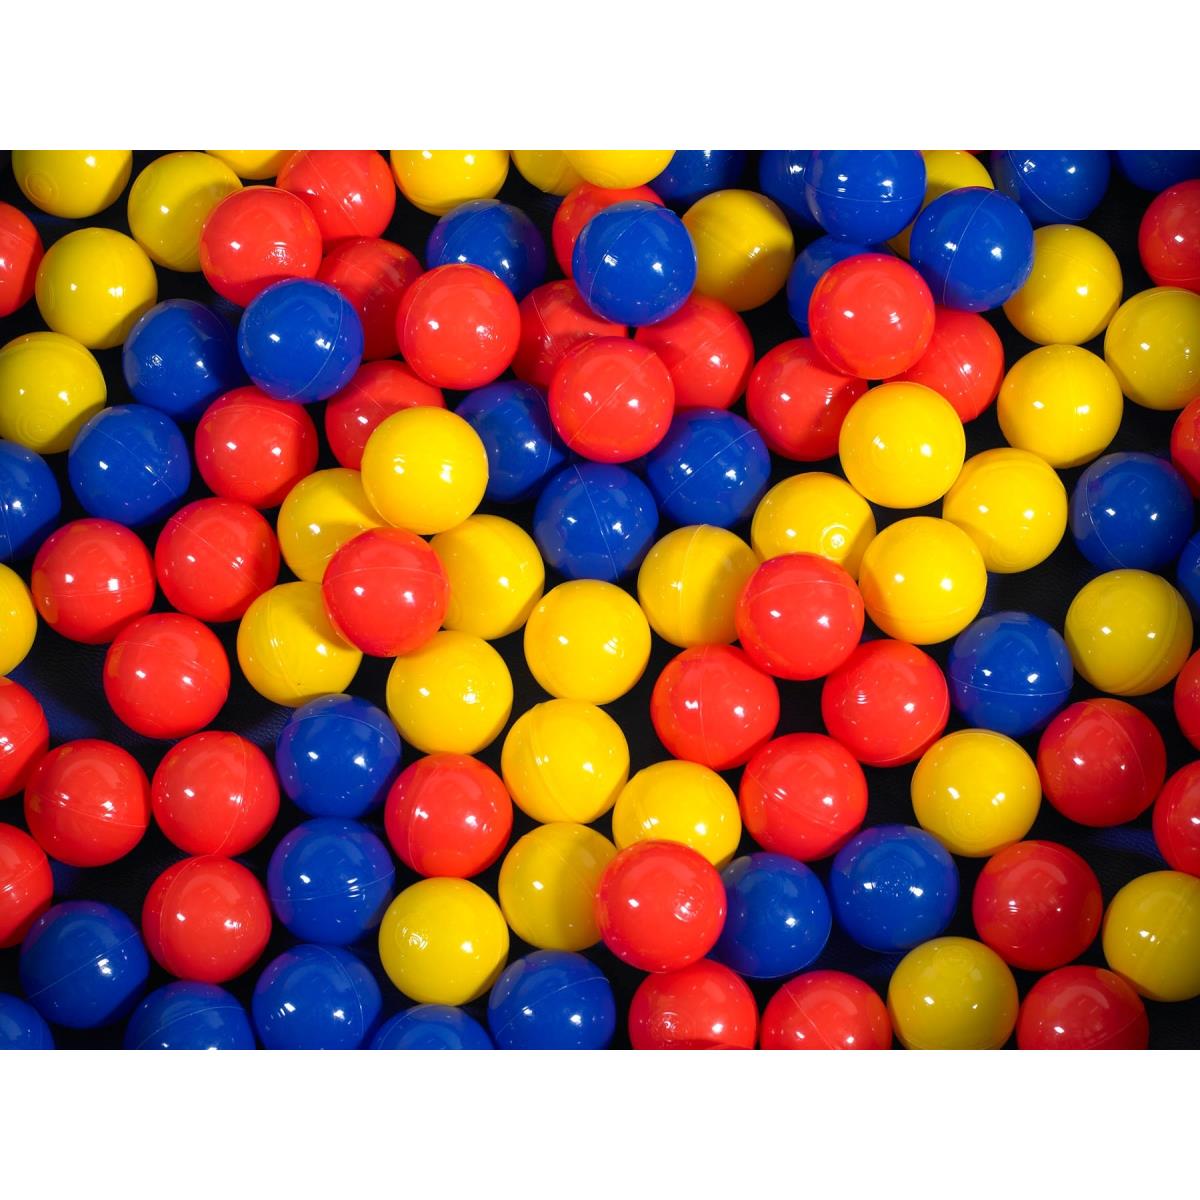 Picture of Childrens Factory CF331-531 175 Mixed Color Balls